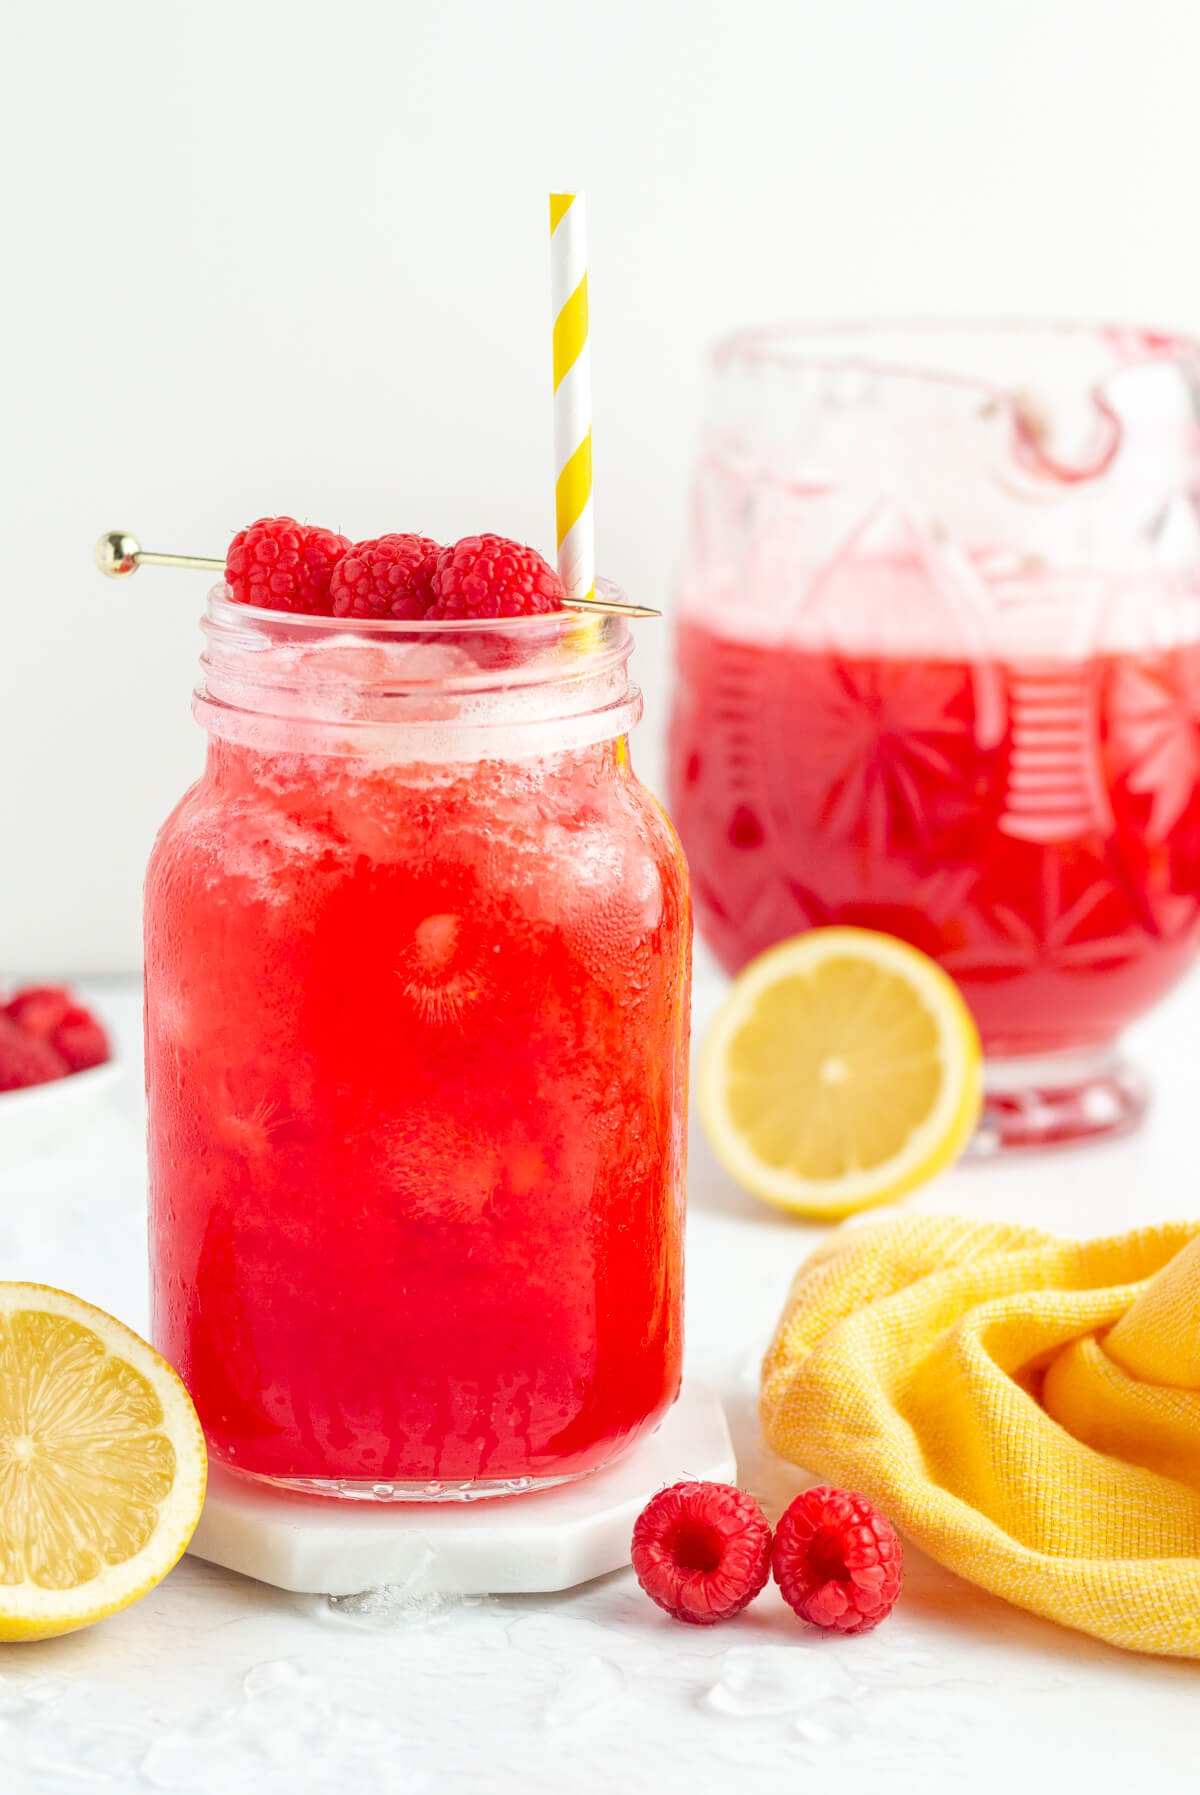 mason jar of lemonade with raspberries on top and a jug of red liquid in the background, with lemons and raspberries scattered around.